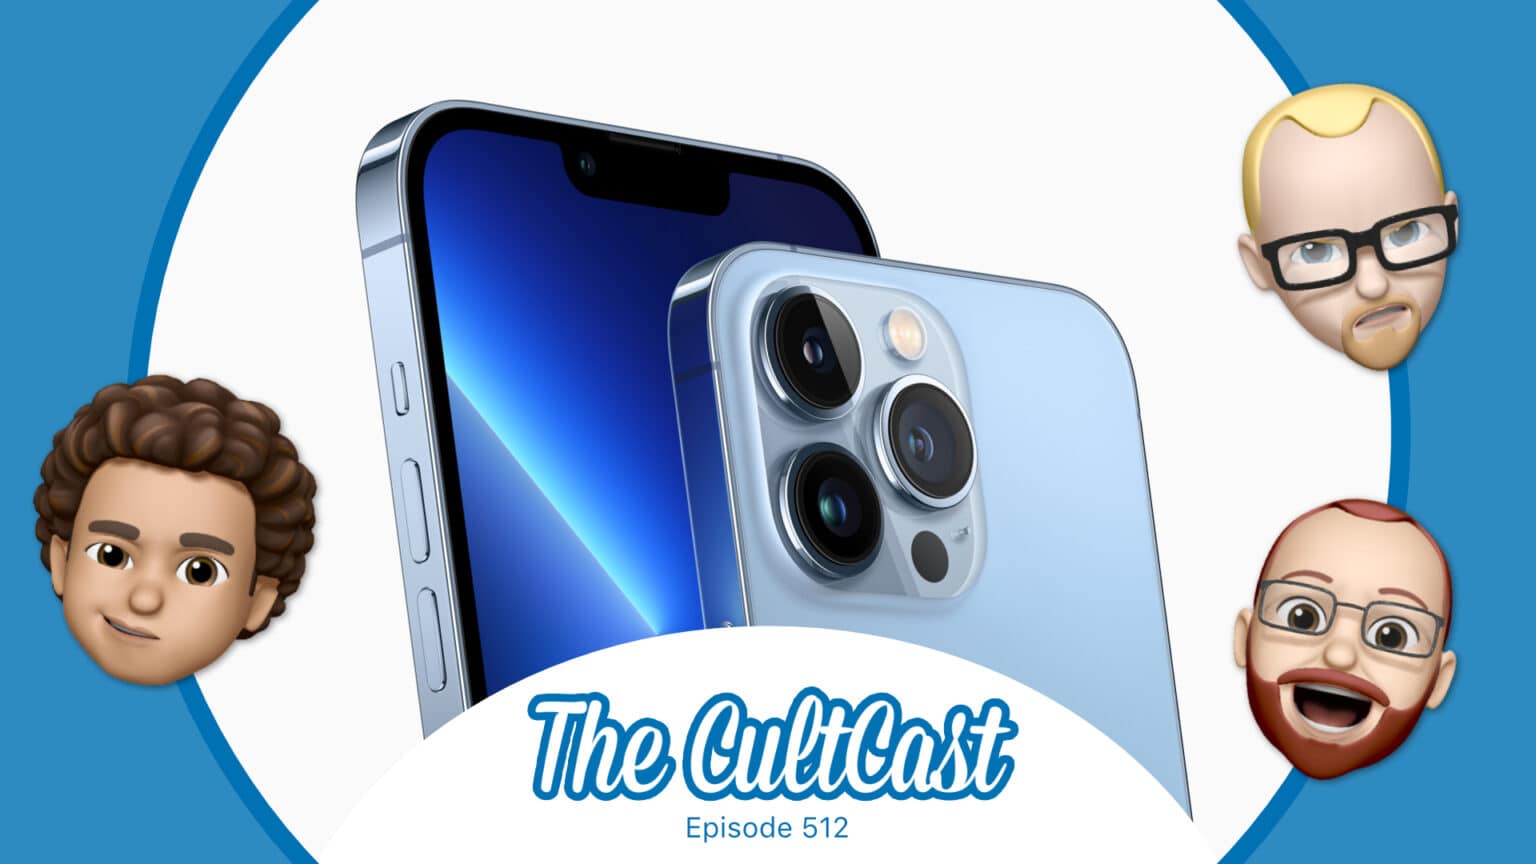 iPhone 13 Pro reviews: One week on! This week on The CultCast, Cult of Mac's Apple podcast.